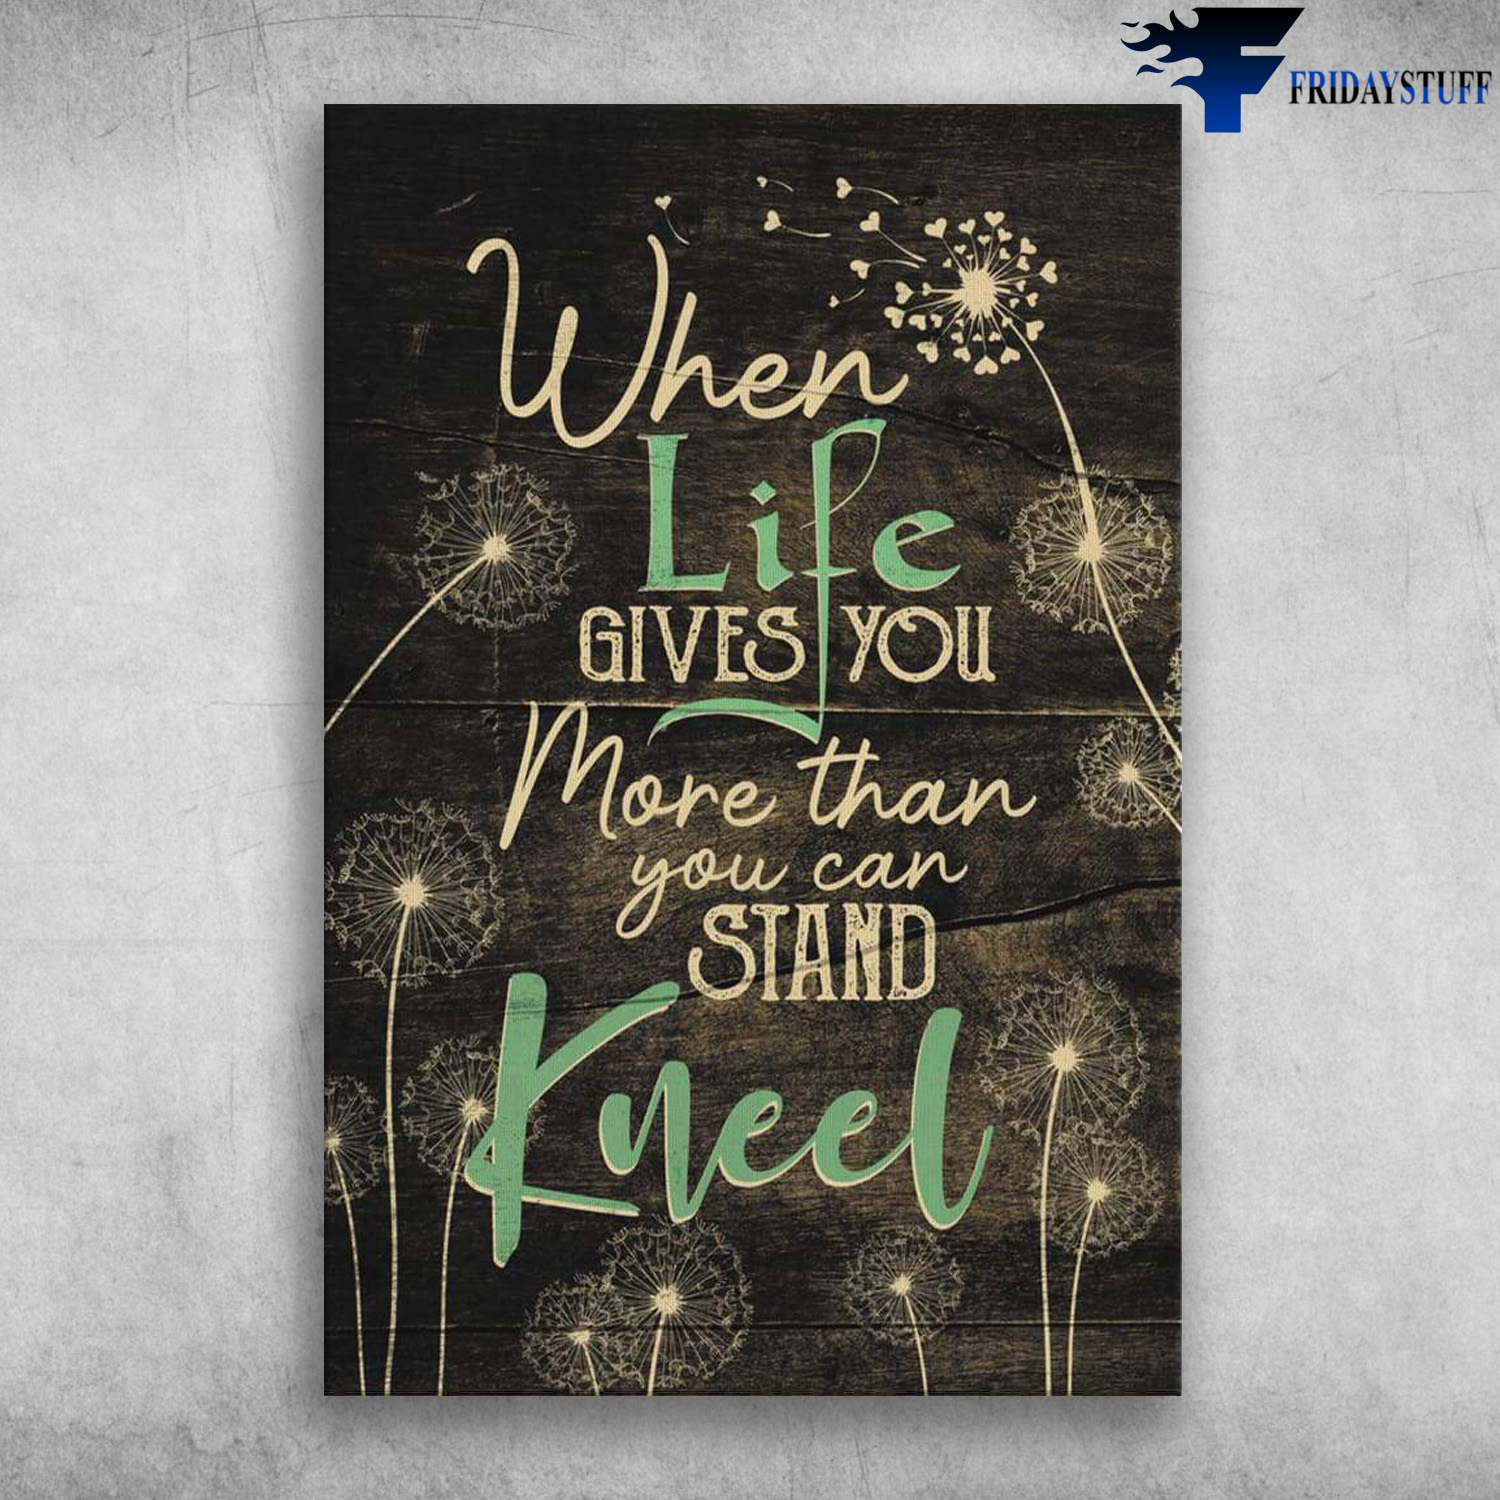 The Dandelion - When Life Gives You More Than You Can Stand Kneel